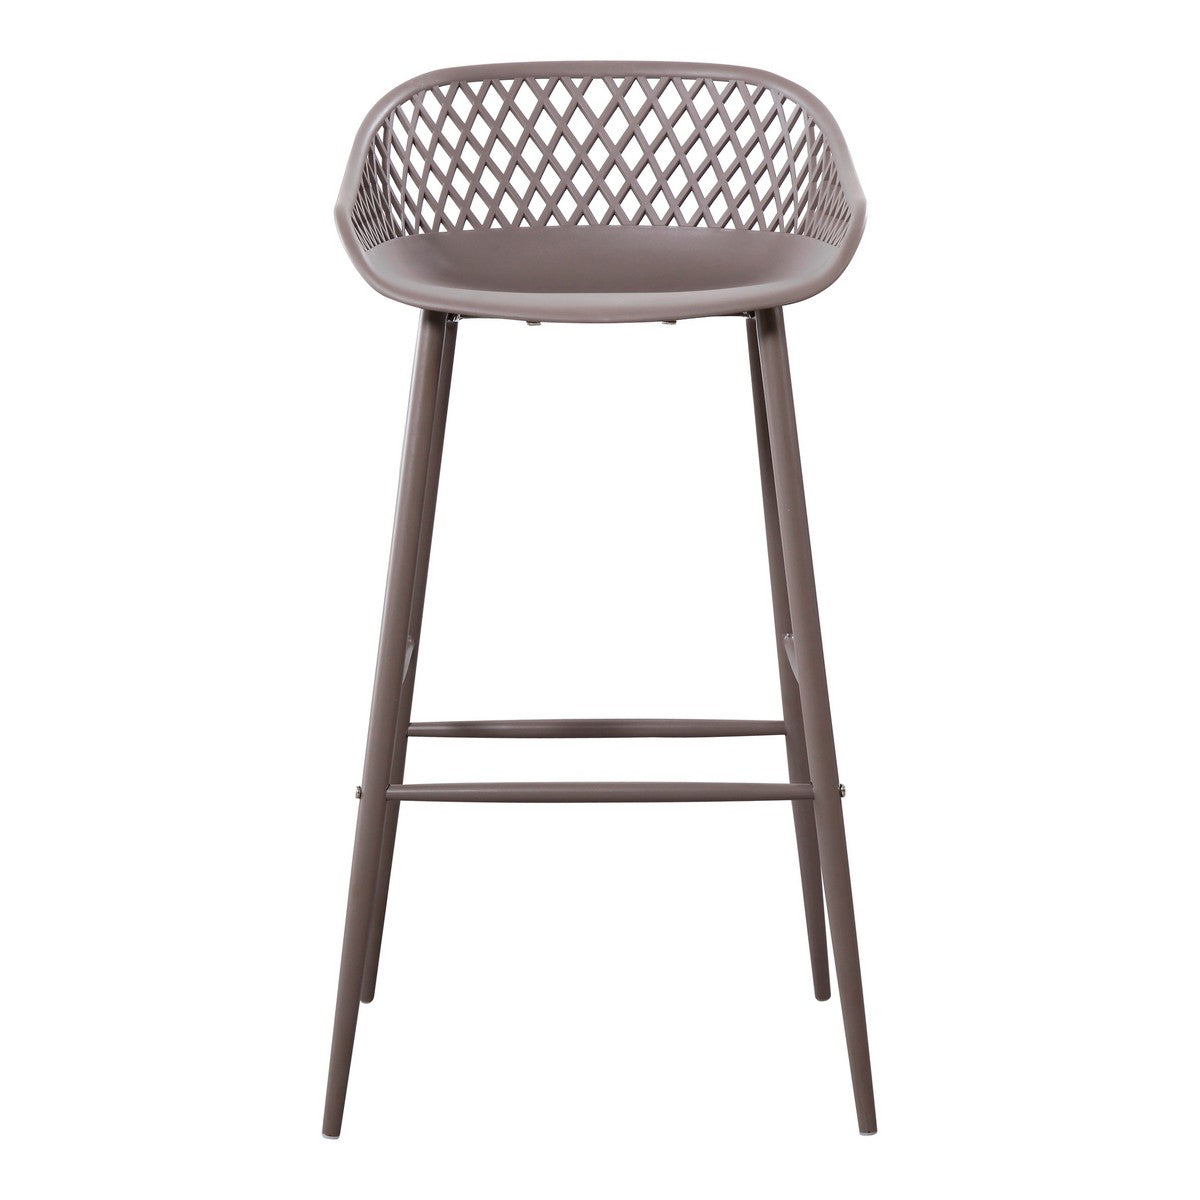 Moe's Home Collection Piazza Outdoor Barstool Grey-Set of Two - QX-1004-15 - Moe's Home Collection - Bar Stools - Minimal And Modern - 1